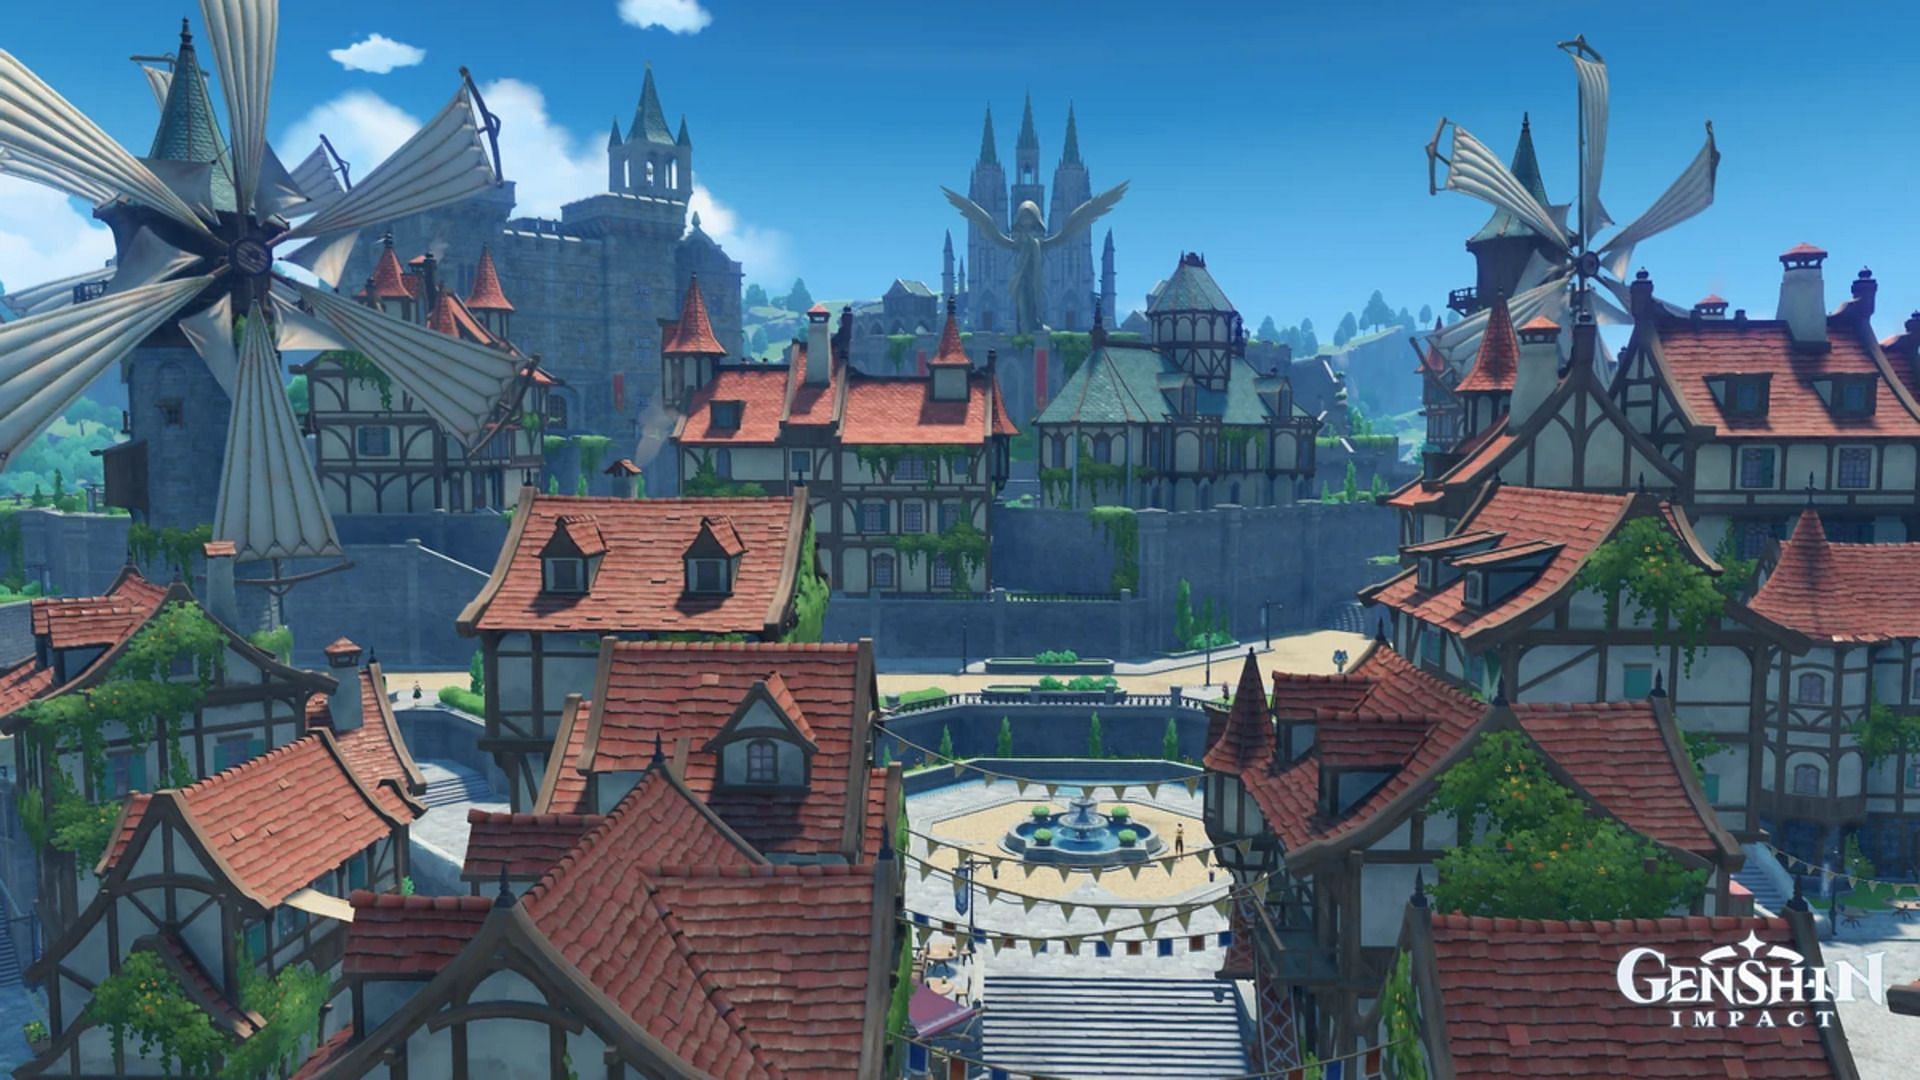 A new area will be opened in Mondstadt (Image via Genshin Impact)